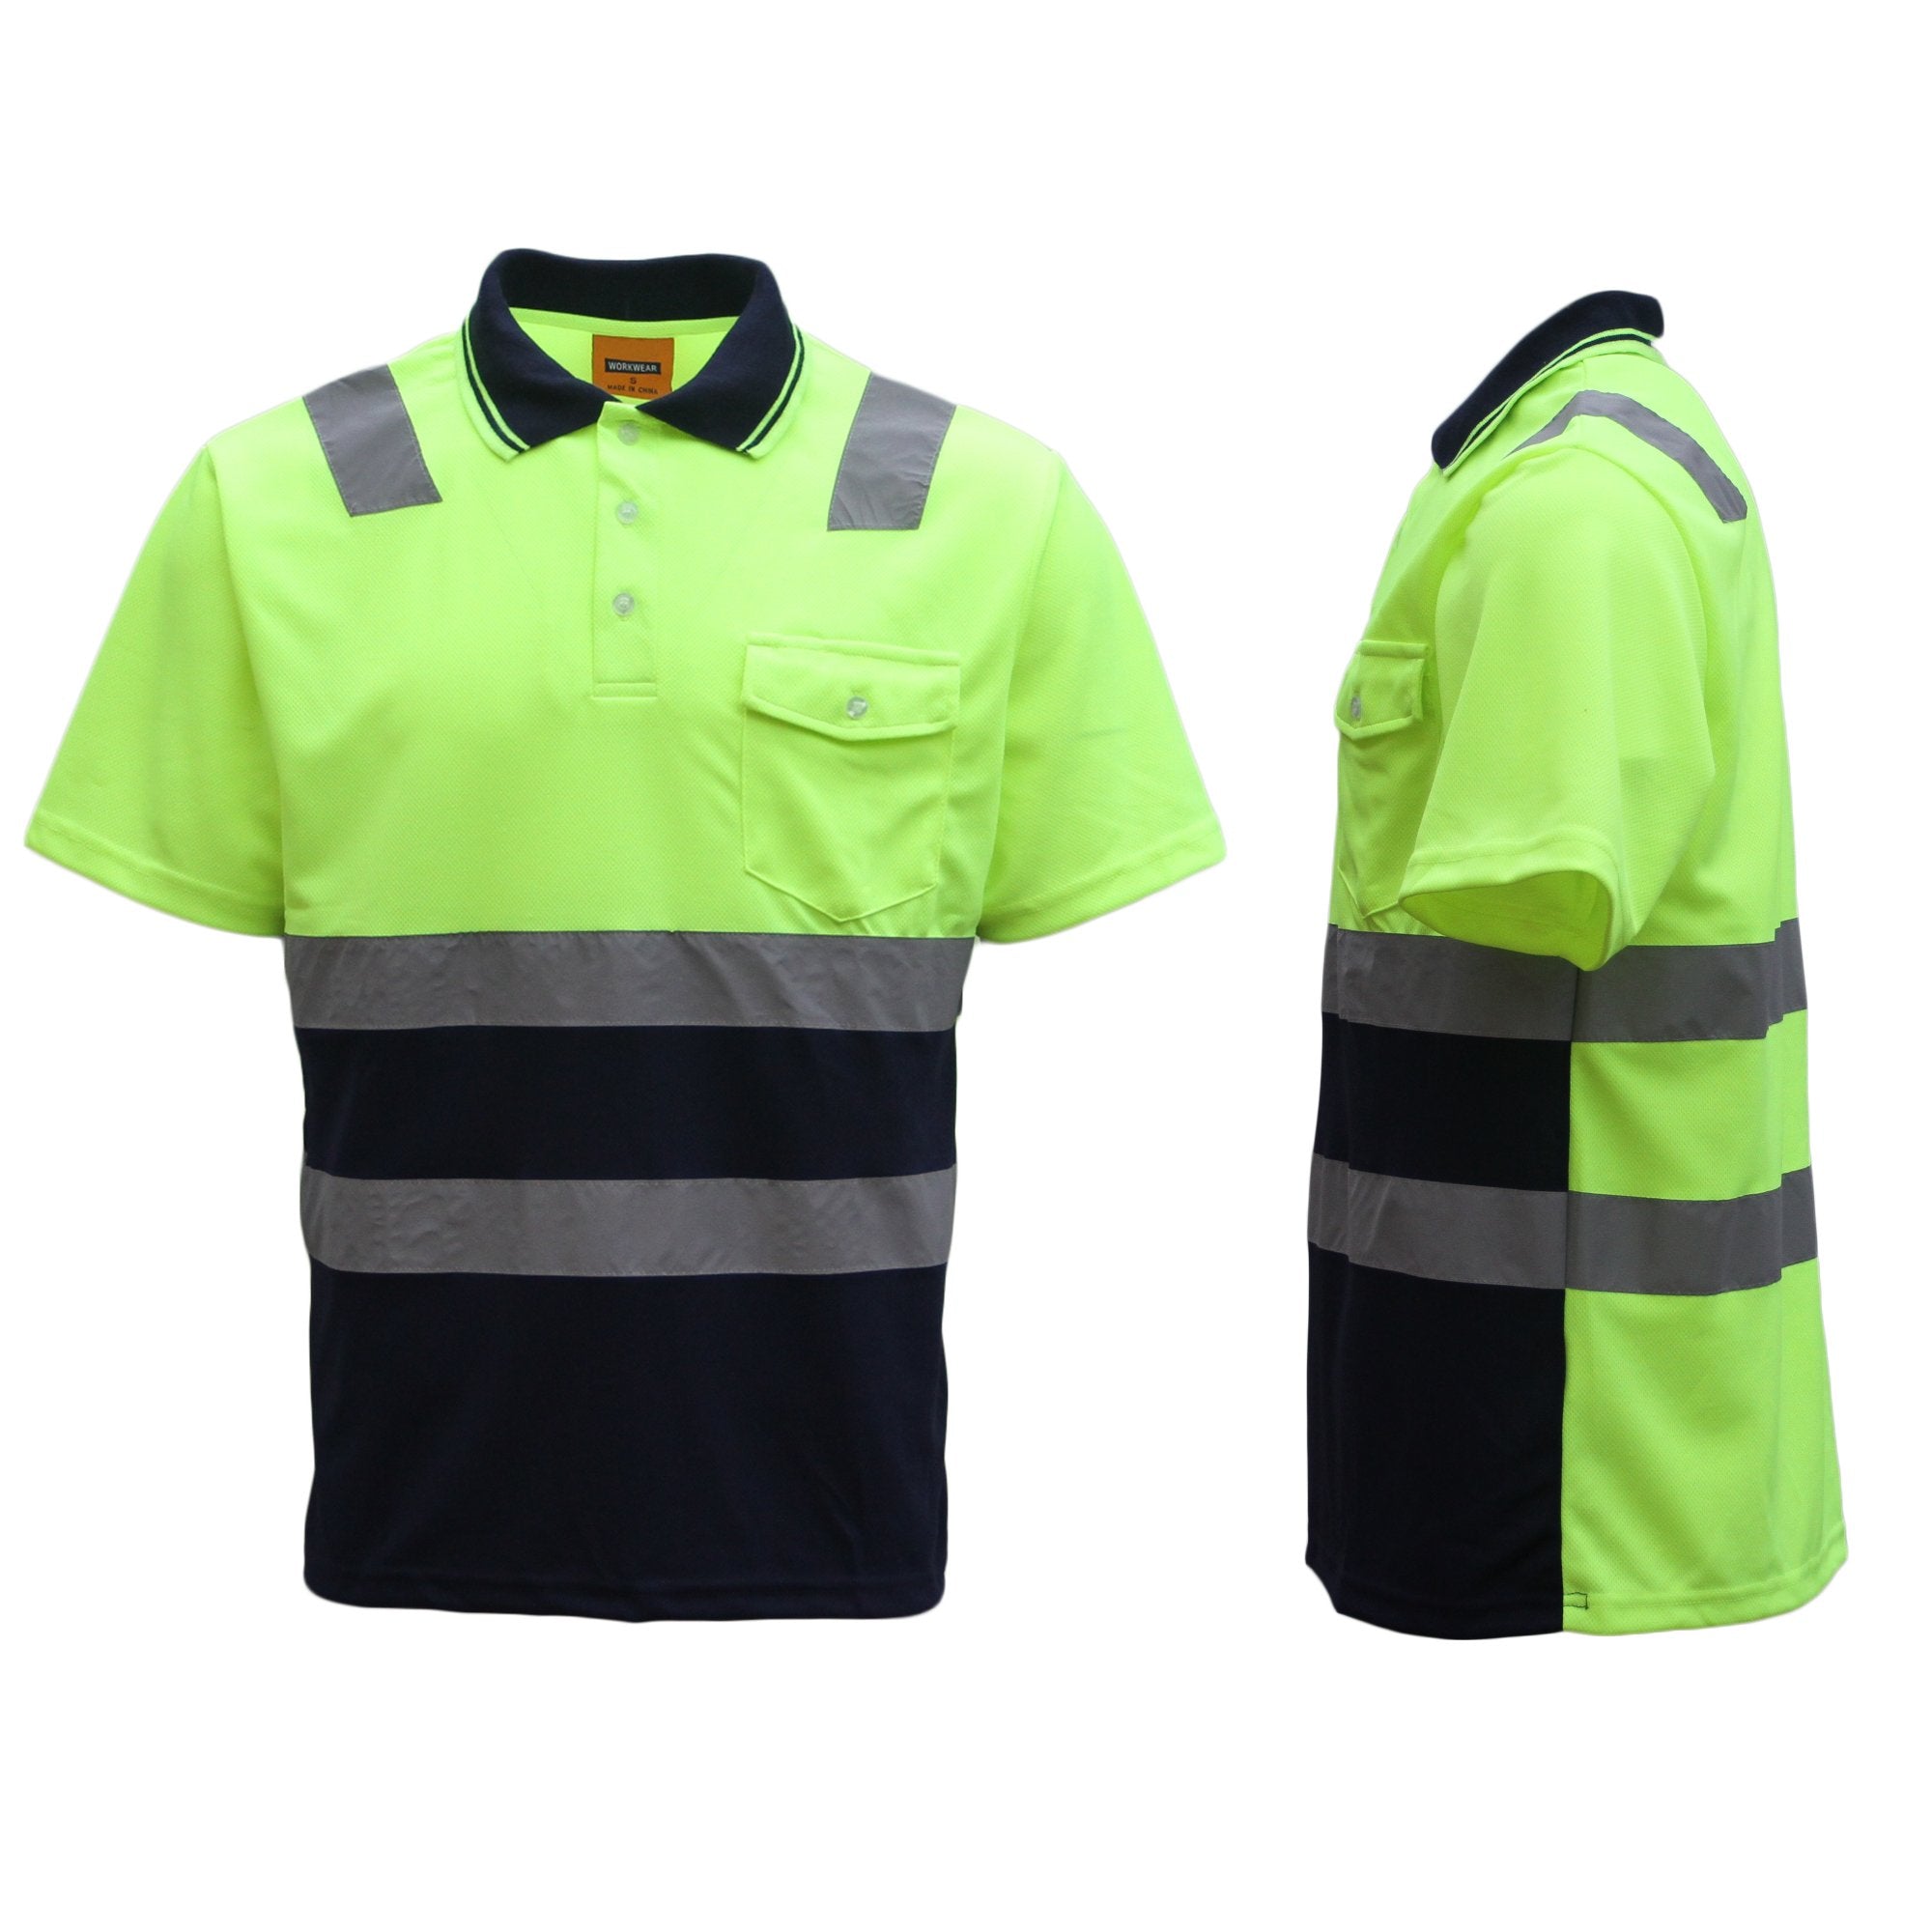 HI VIS Short Sleeve Workwear Shirt w Reflective Tape Cool Dry Safety Polo 2 Tone, Fluoro Yellow / Navy, XS